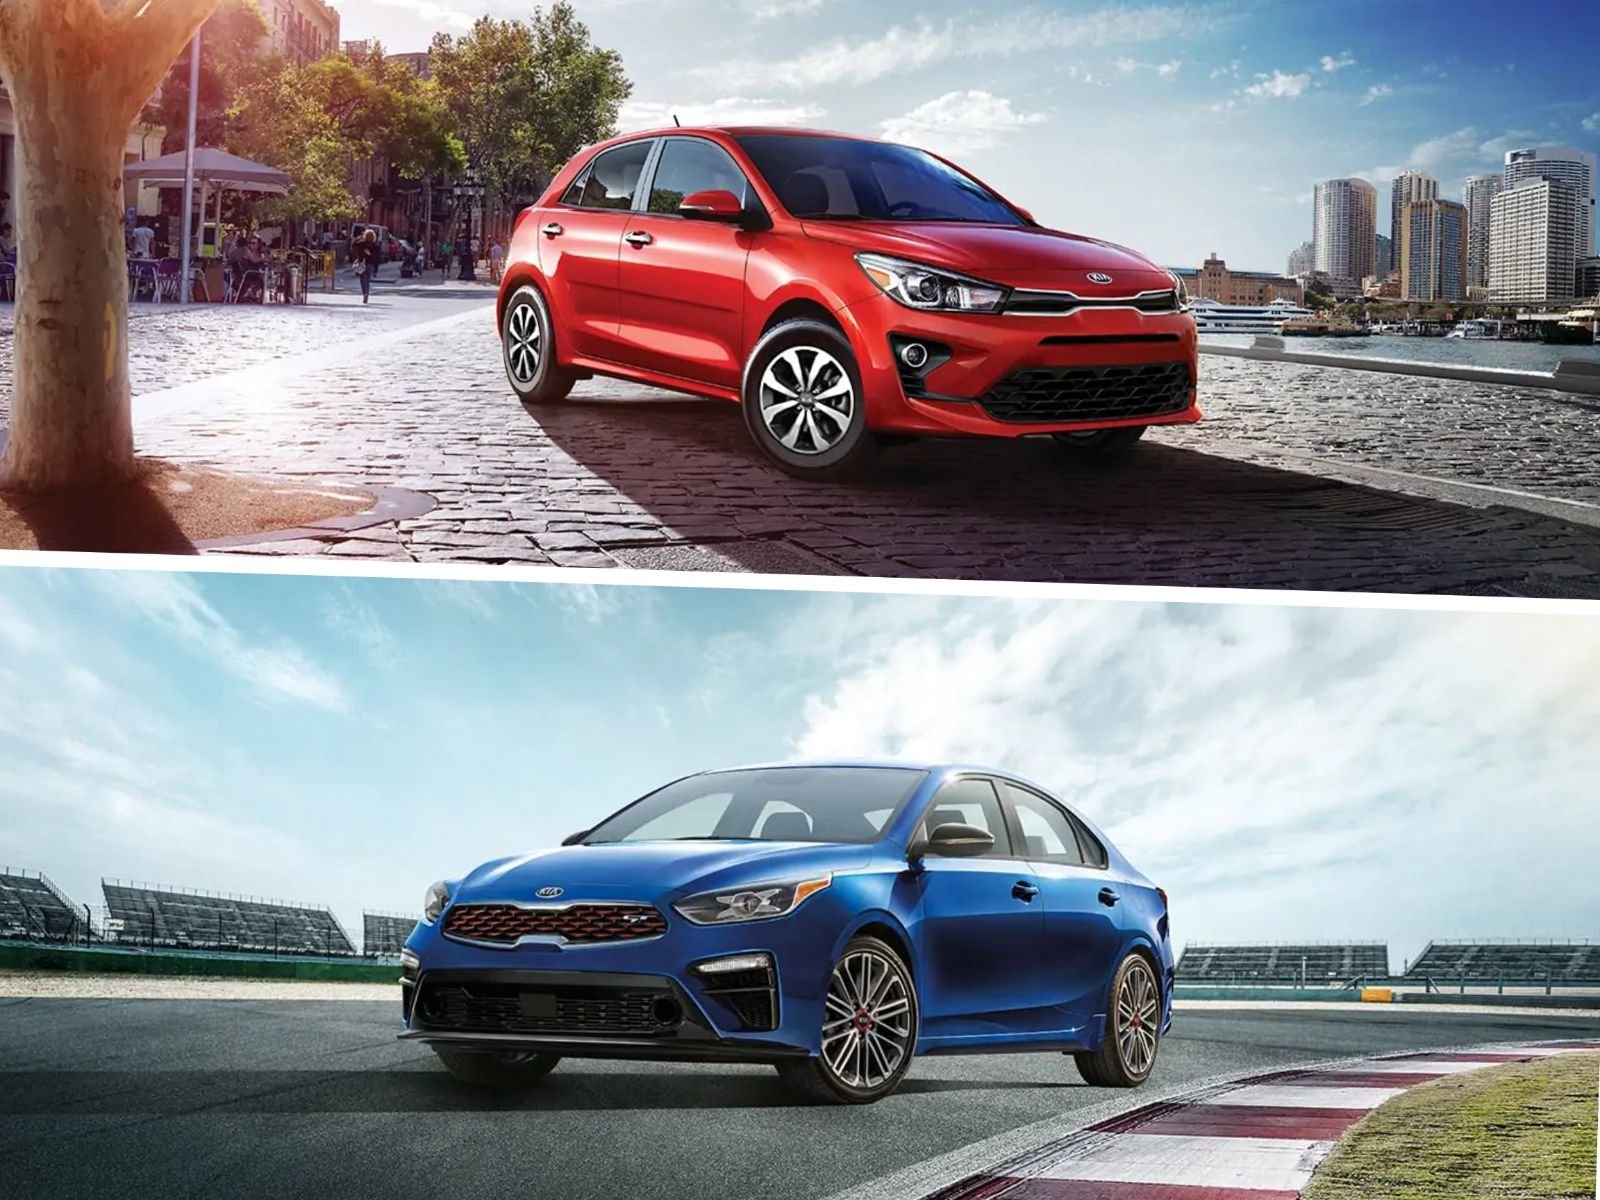 Which Kia Vehicles Are The Most Fuel Efficient?